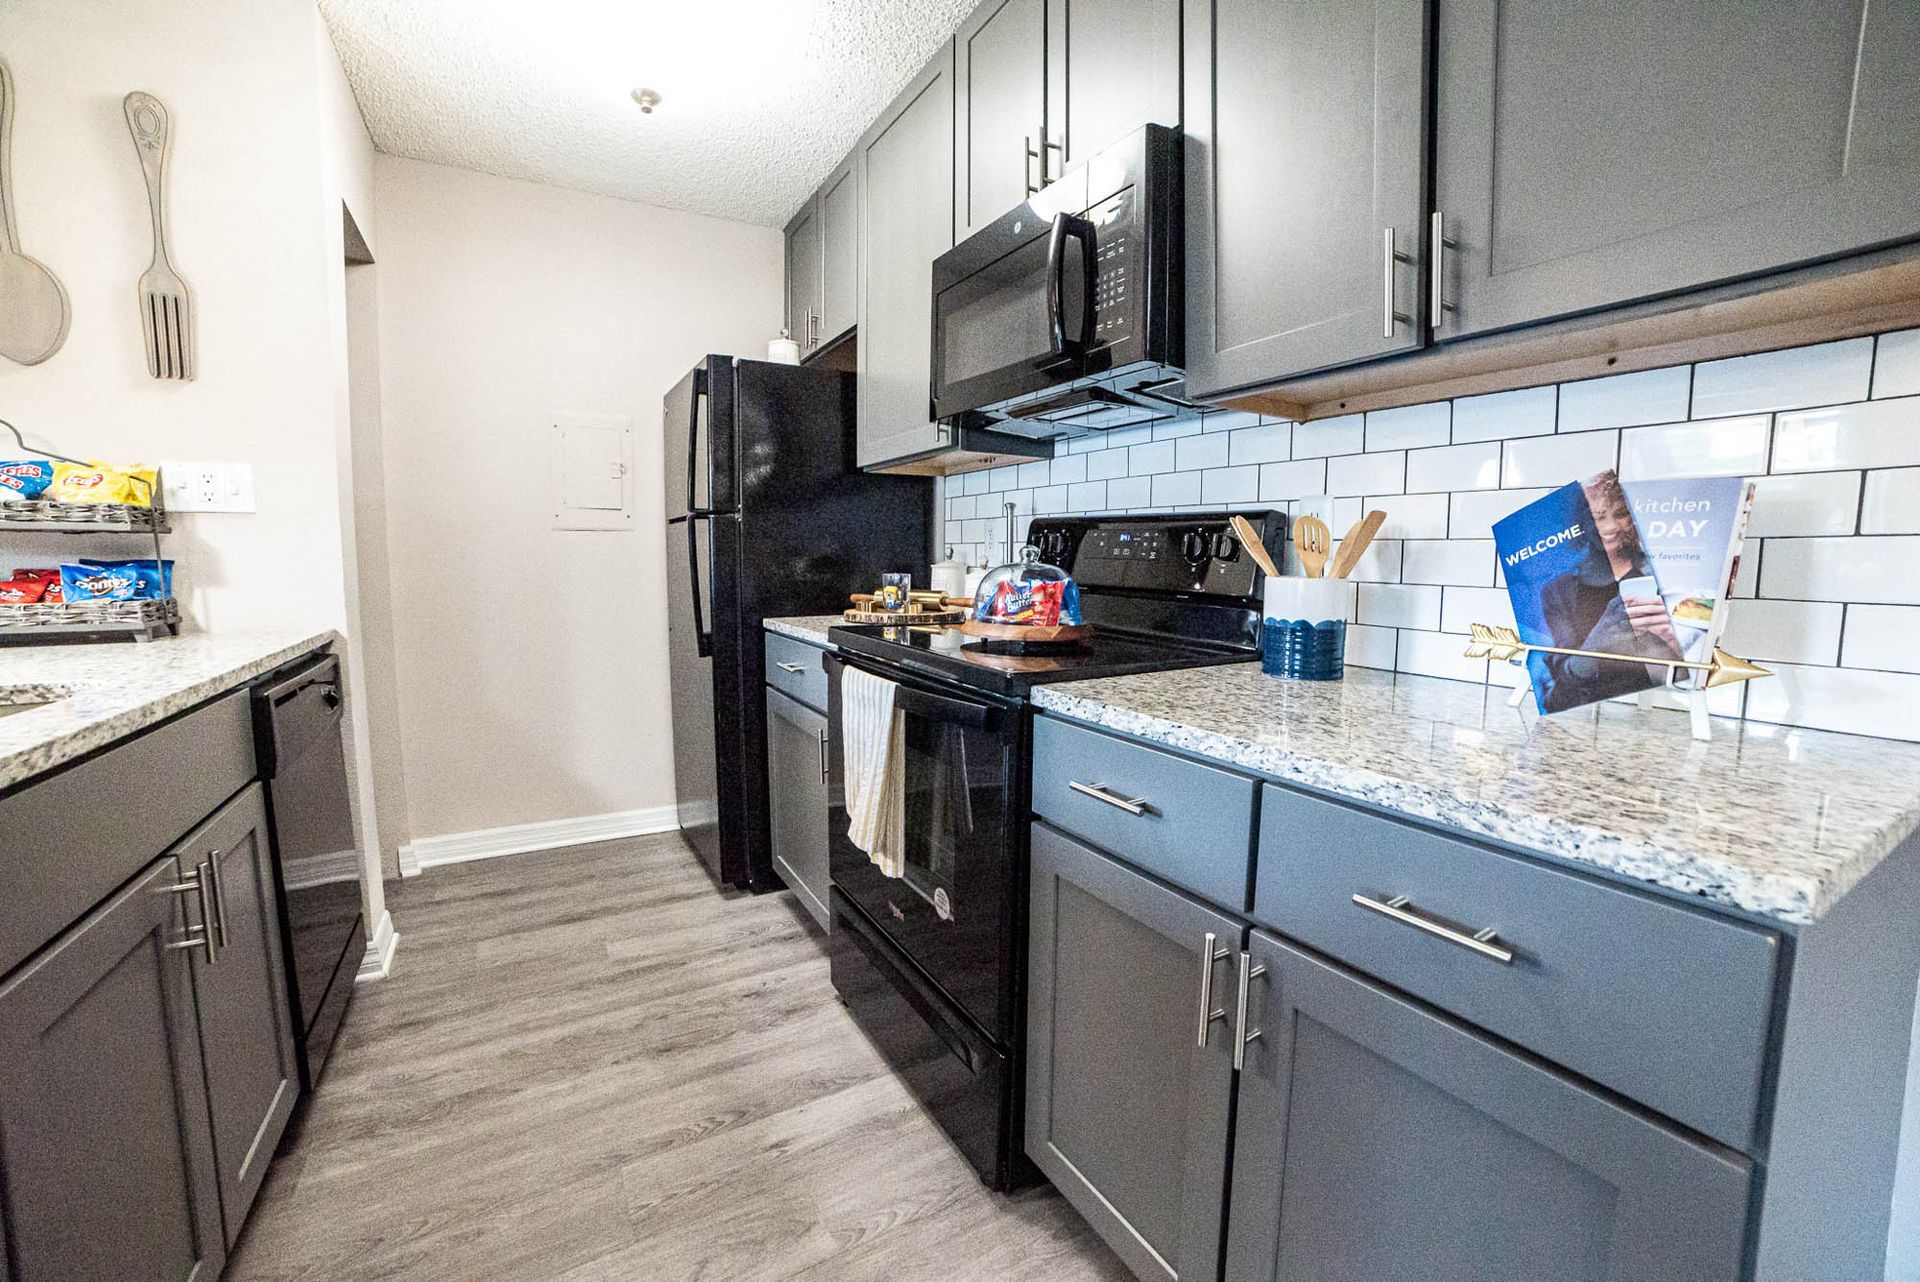 St. Petersburg FL Luxury Apartments - Trellis at the Lakes - Kitchen with Granite-Style Countertops, Grey Cabinets, Wood-Style Flooring, and Black Appliances.